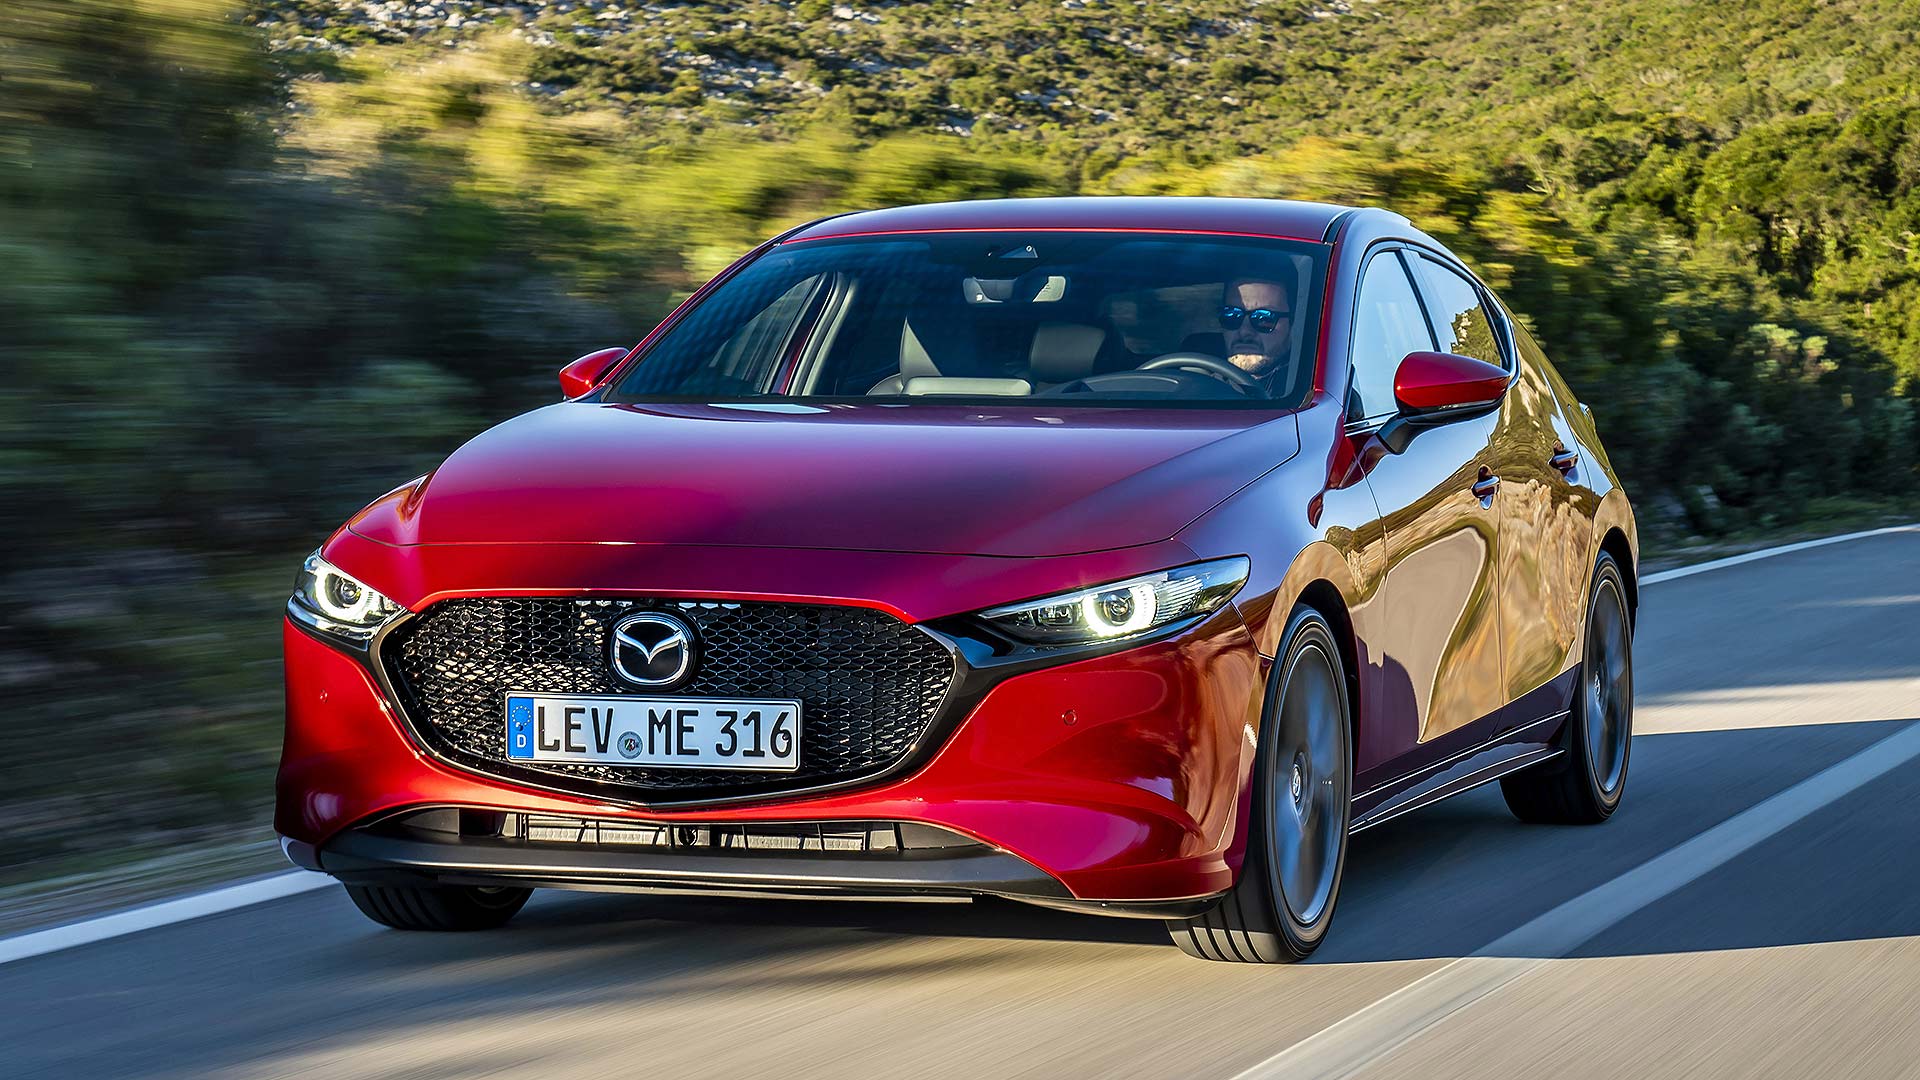 New Mazda prices, specs and UK launch date revealed